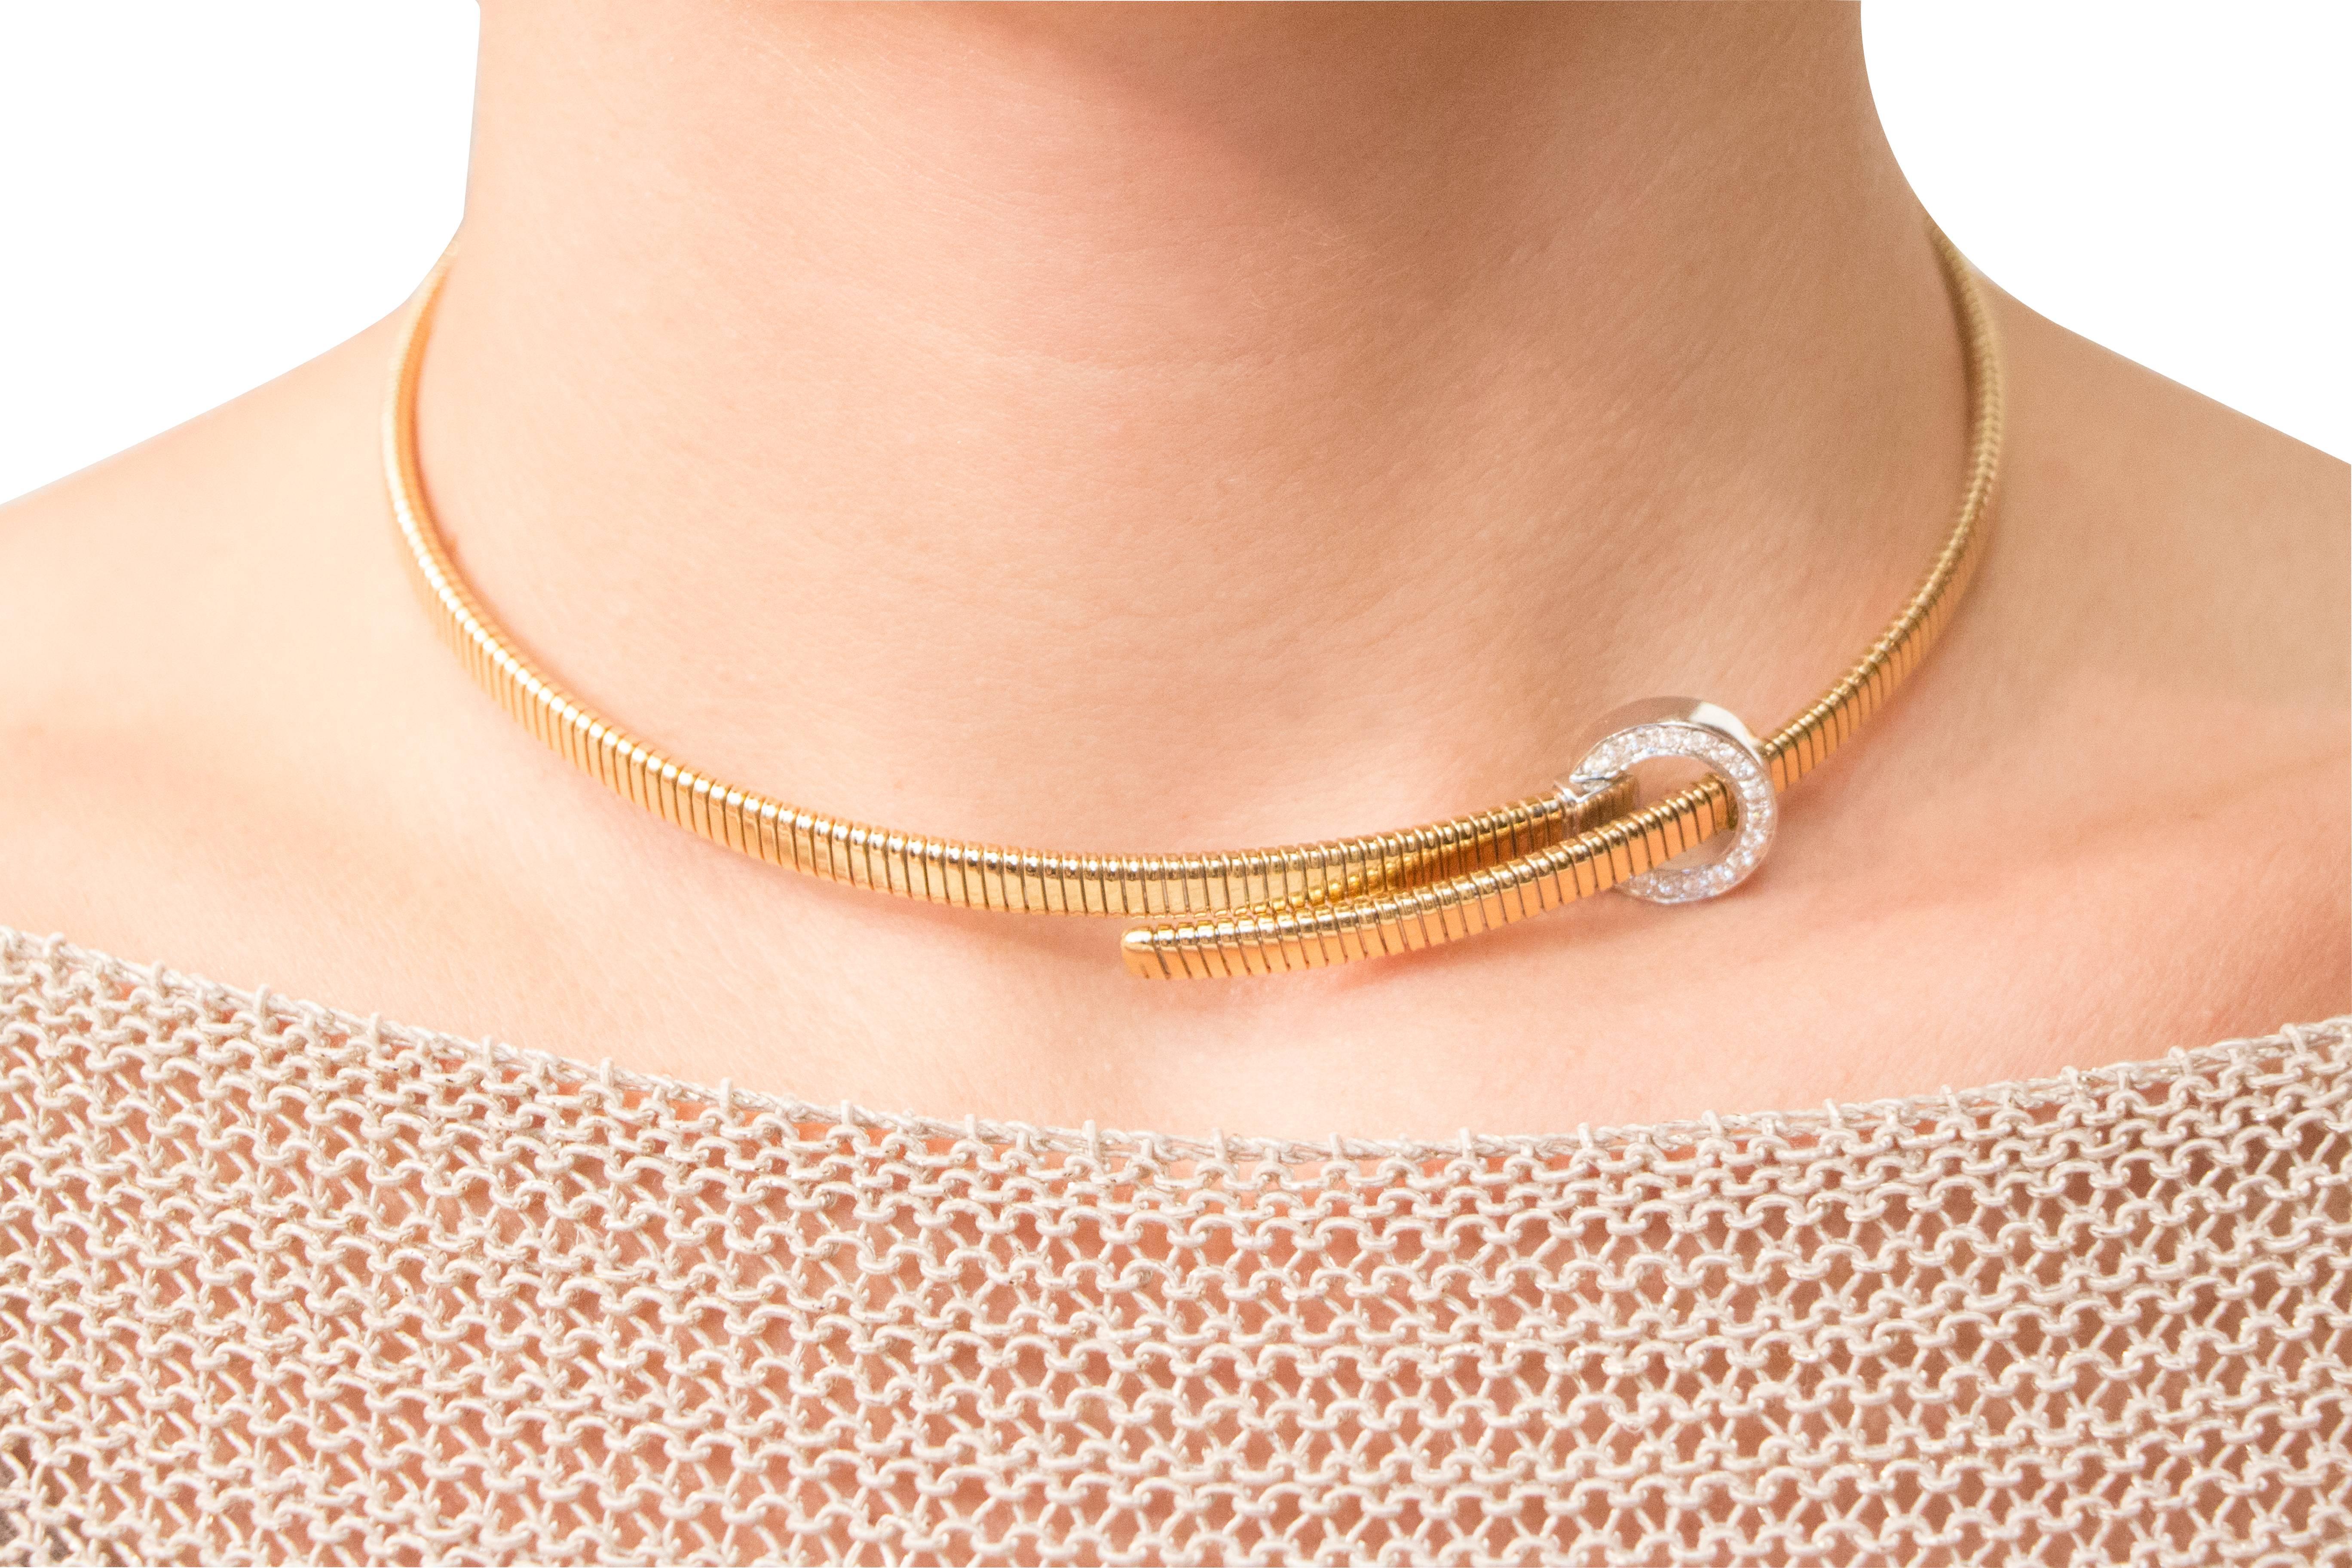 Alex Jona design collection, hand crafted in Italy, tubogas 18k yellow gold belt choker necklace with a circle white gold buckle set with white diamonds, F color, VVS1 clarity.
Dimensions: H x 0.5 cm, Dm x 13 cm - H x 0.19 in., Dm x 5.11 in.

Alex